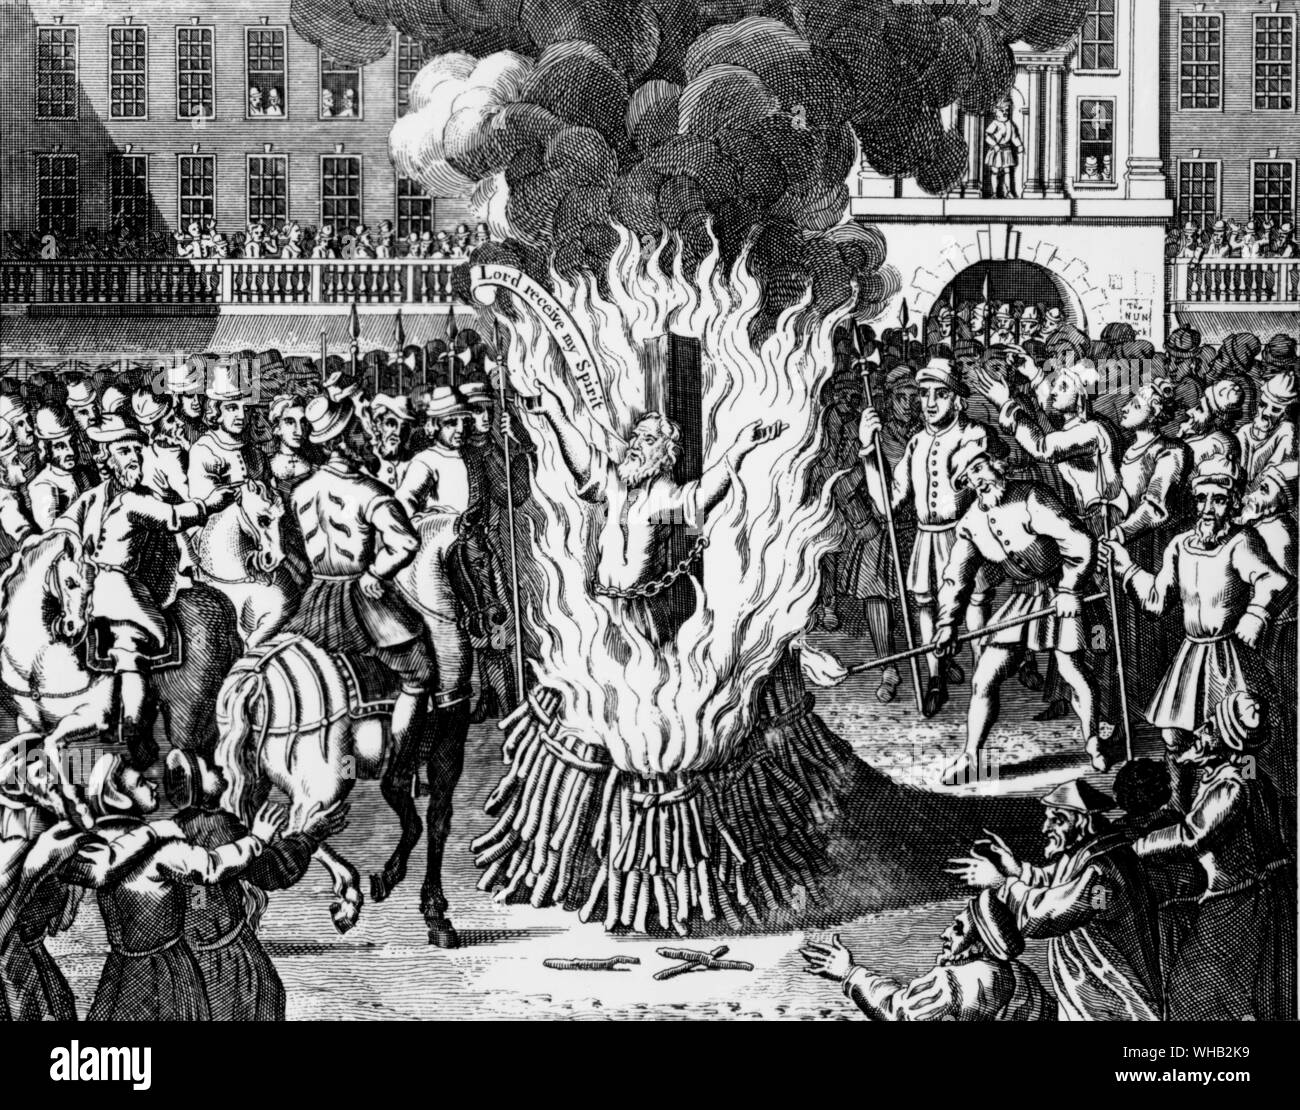 The burning of Master John Rogers - Vicar of St. Sepulchers & Reader of St. Paul's in London - 4th February 1555.. Foxe's Book of Martyrs, chapter 16.. Stock Photo